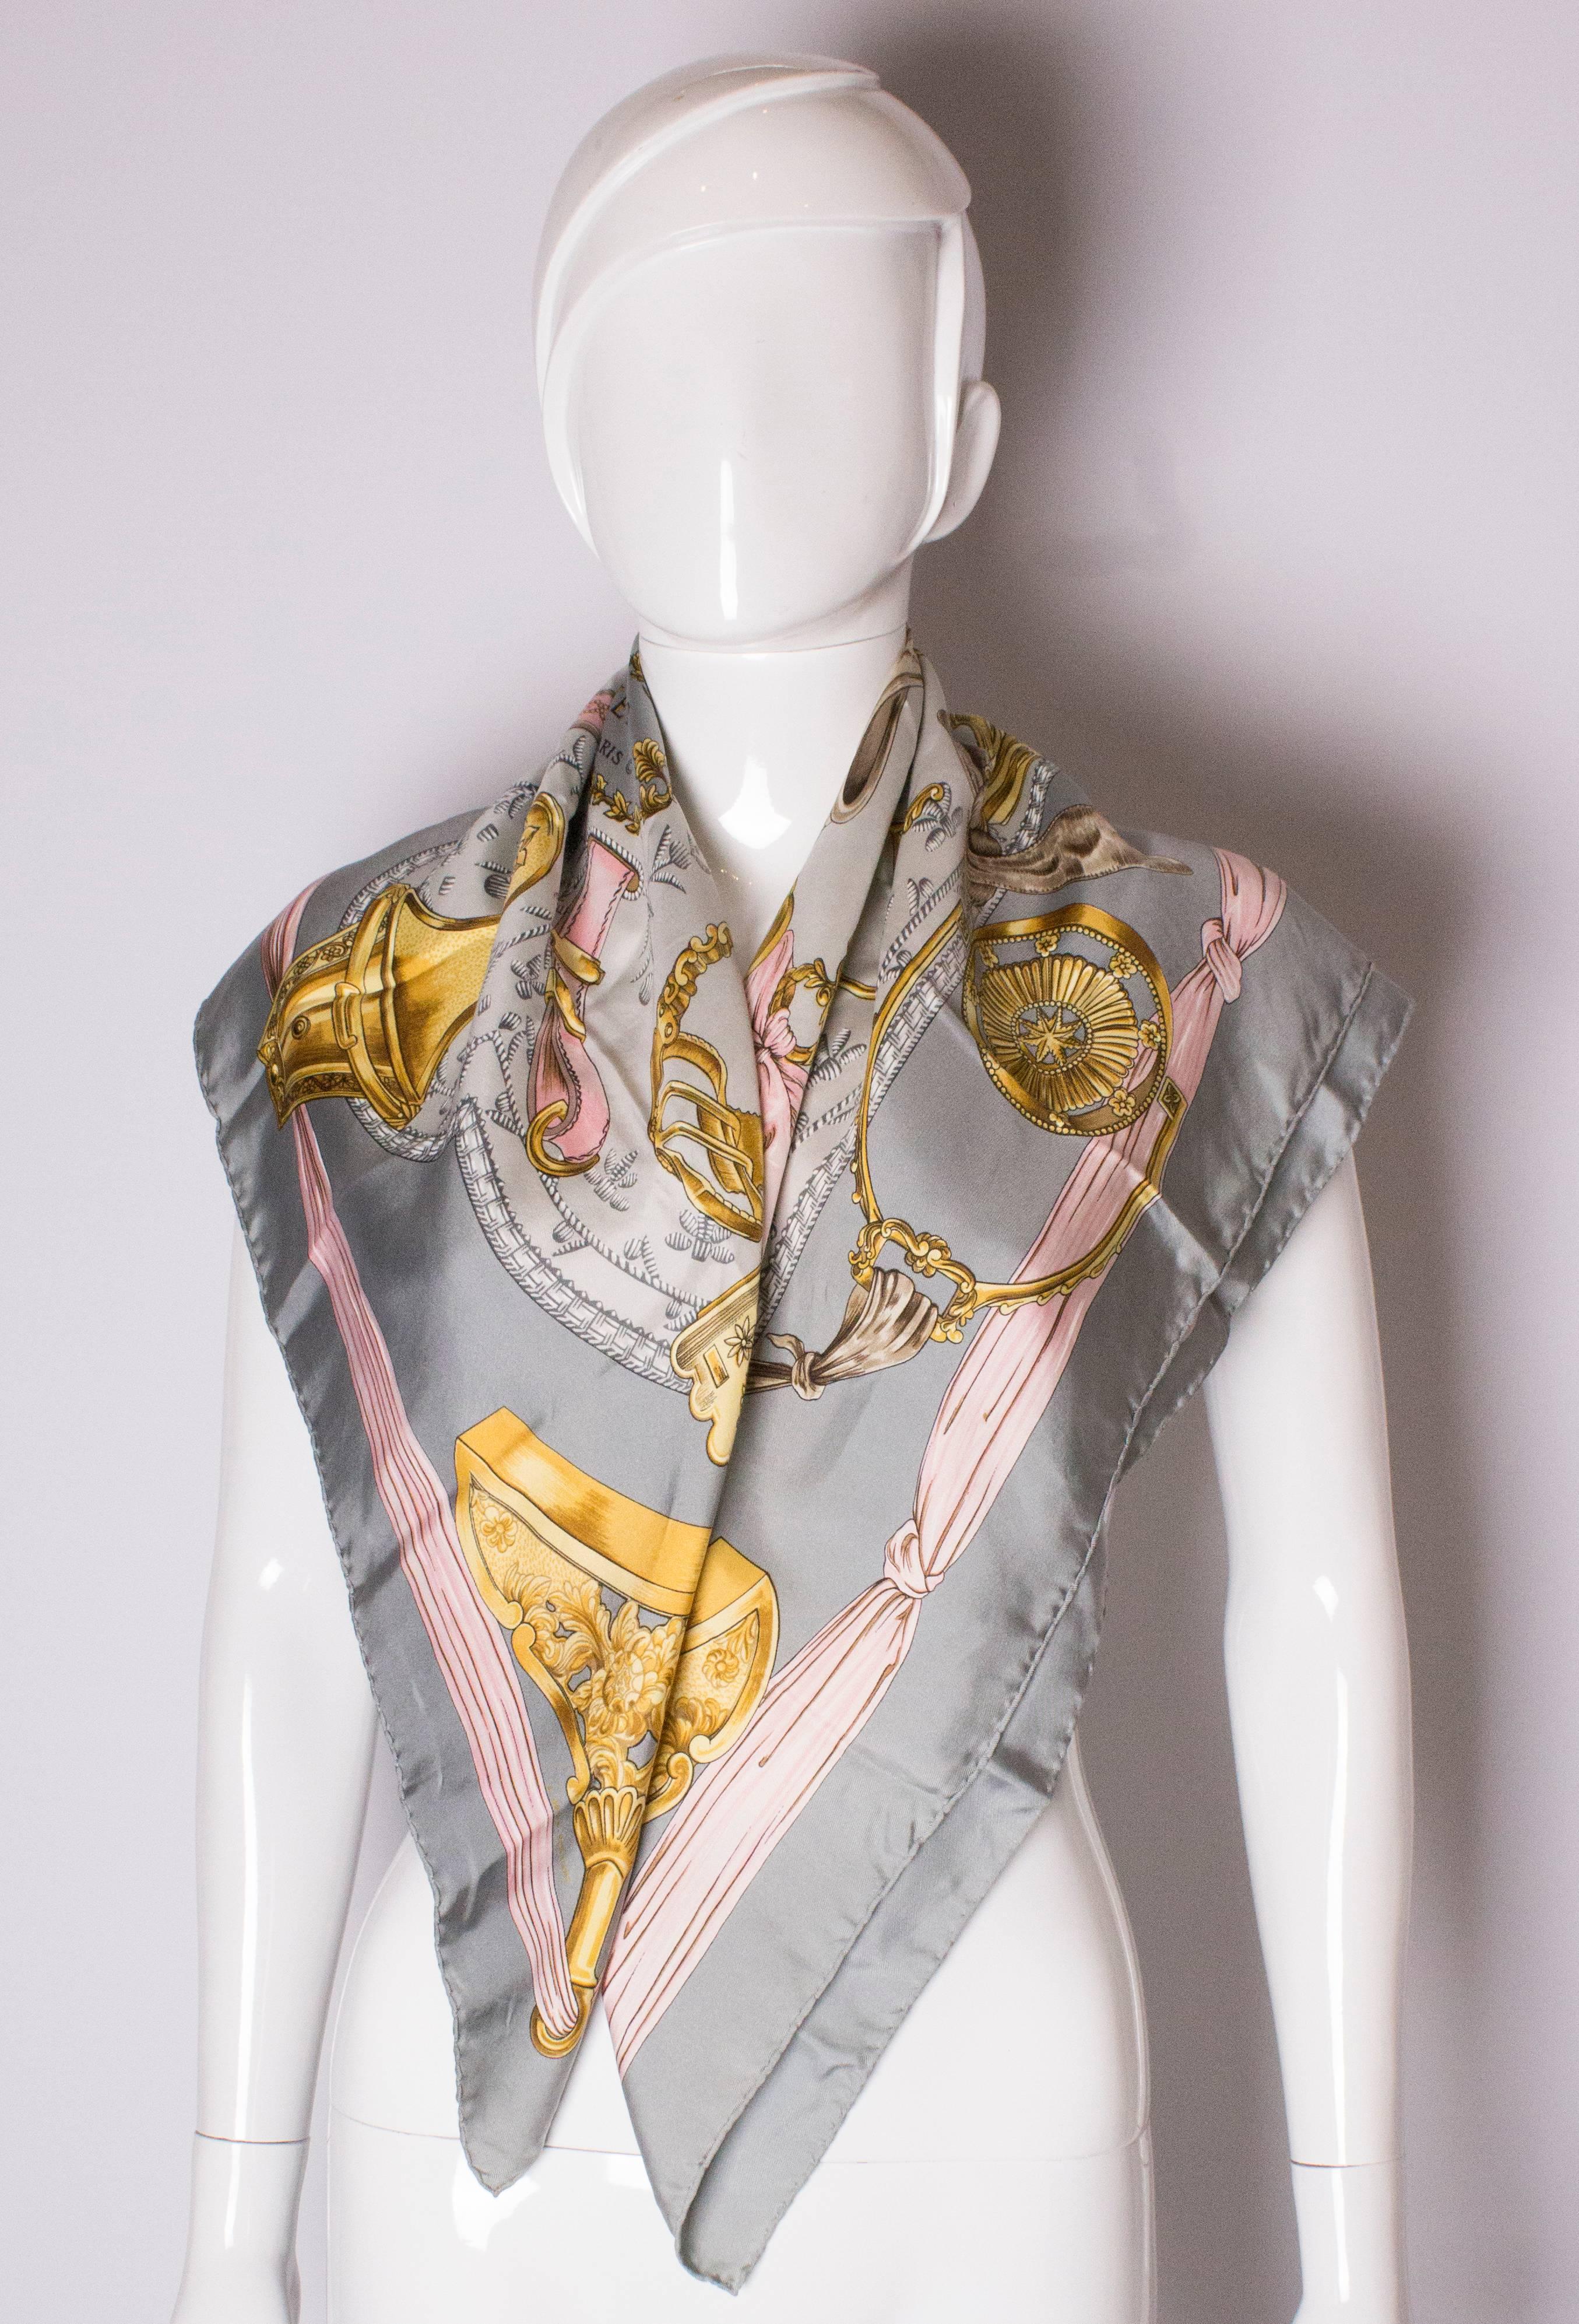 A super scarf by Hermes, Etriers design with a dove grey border, pink, gold and grey design.